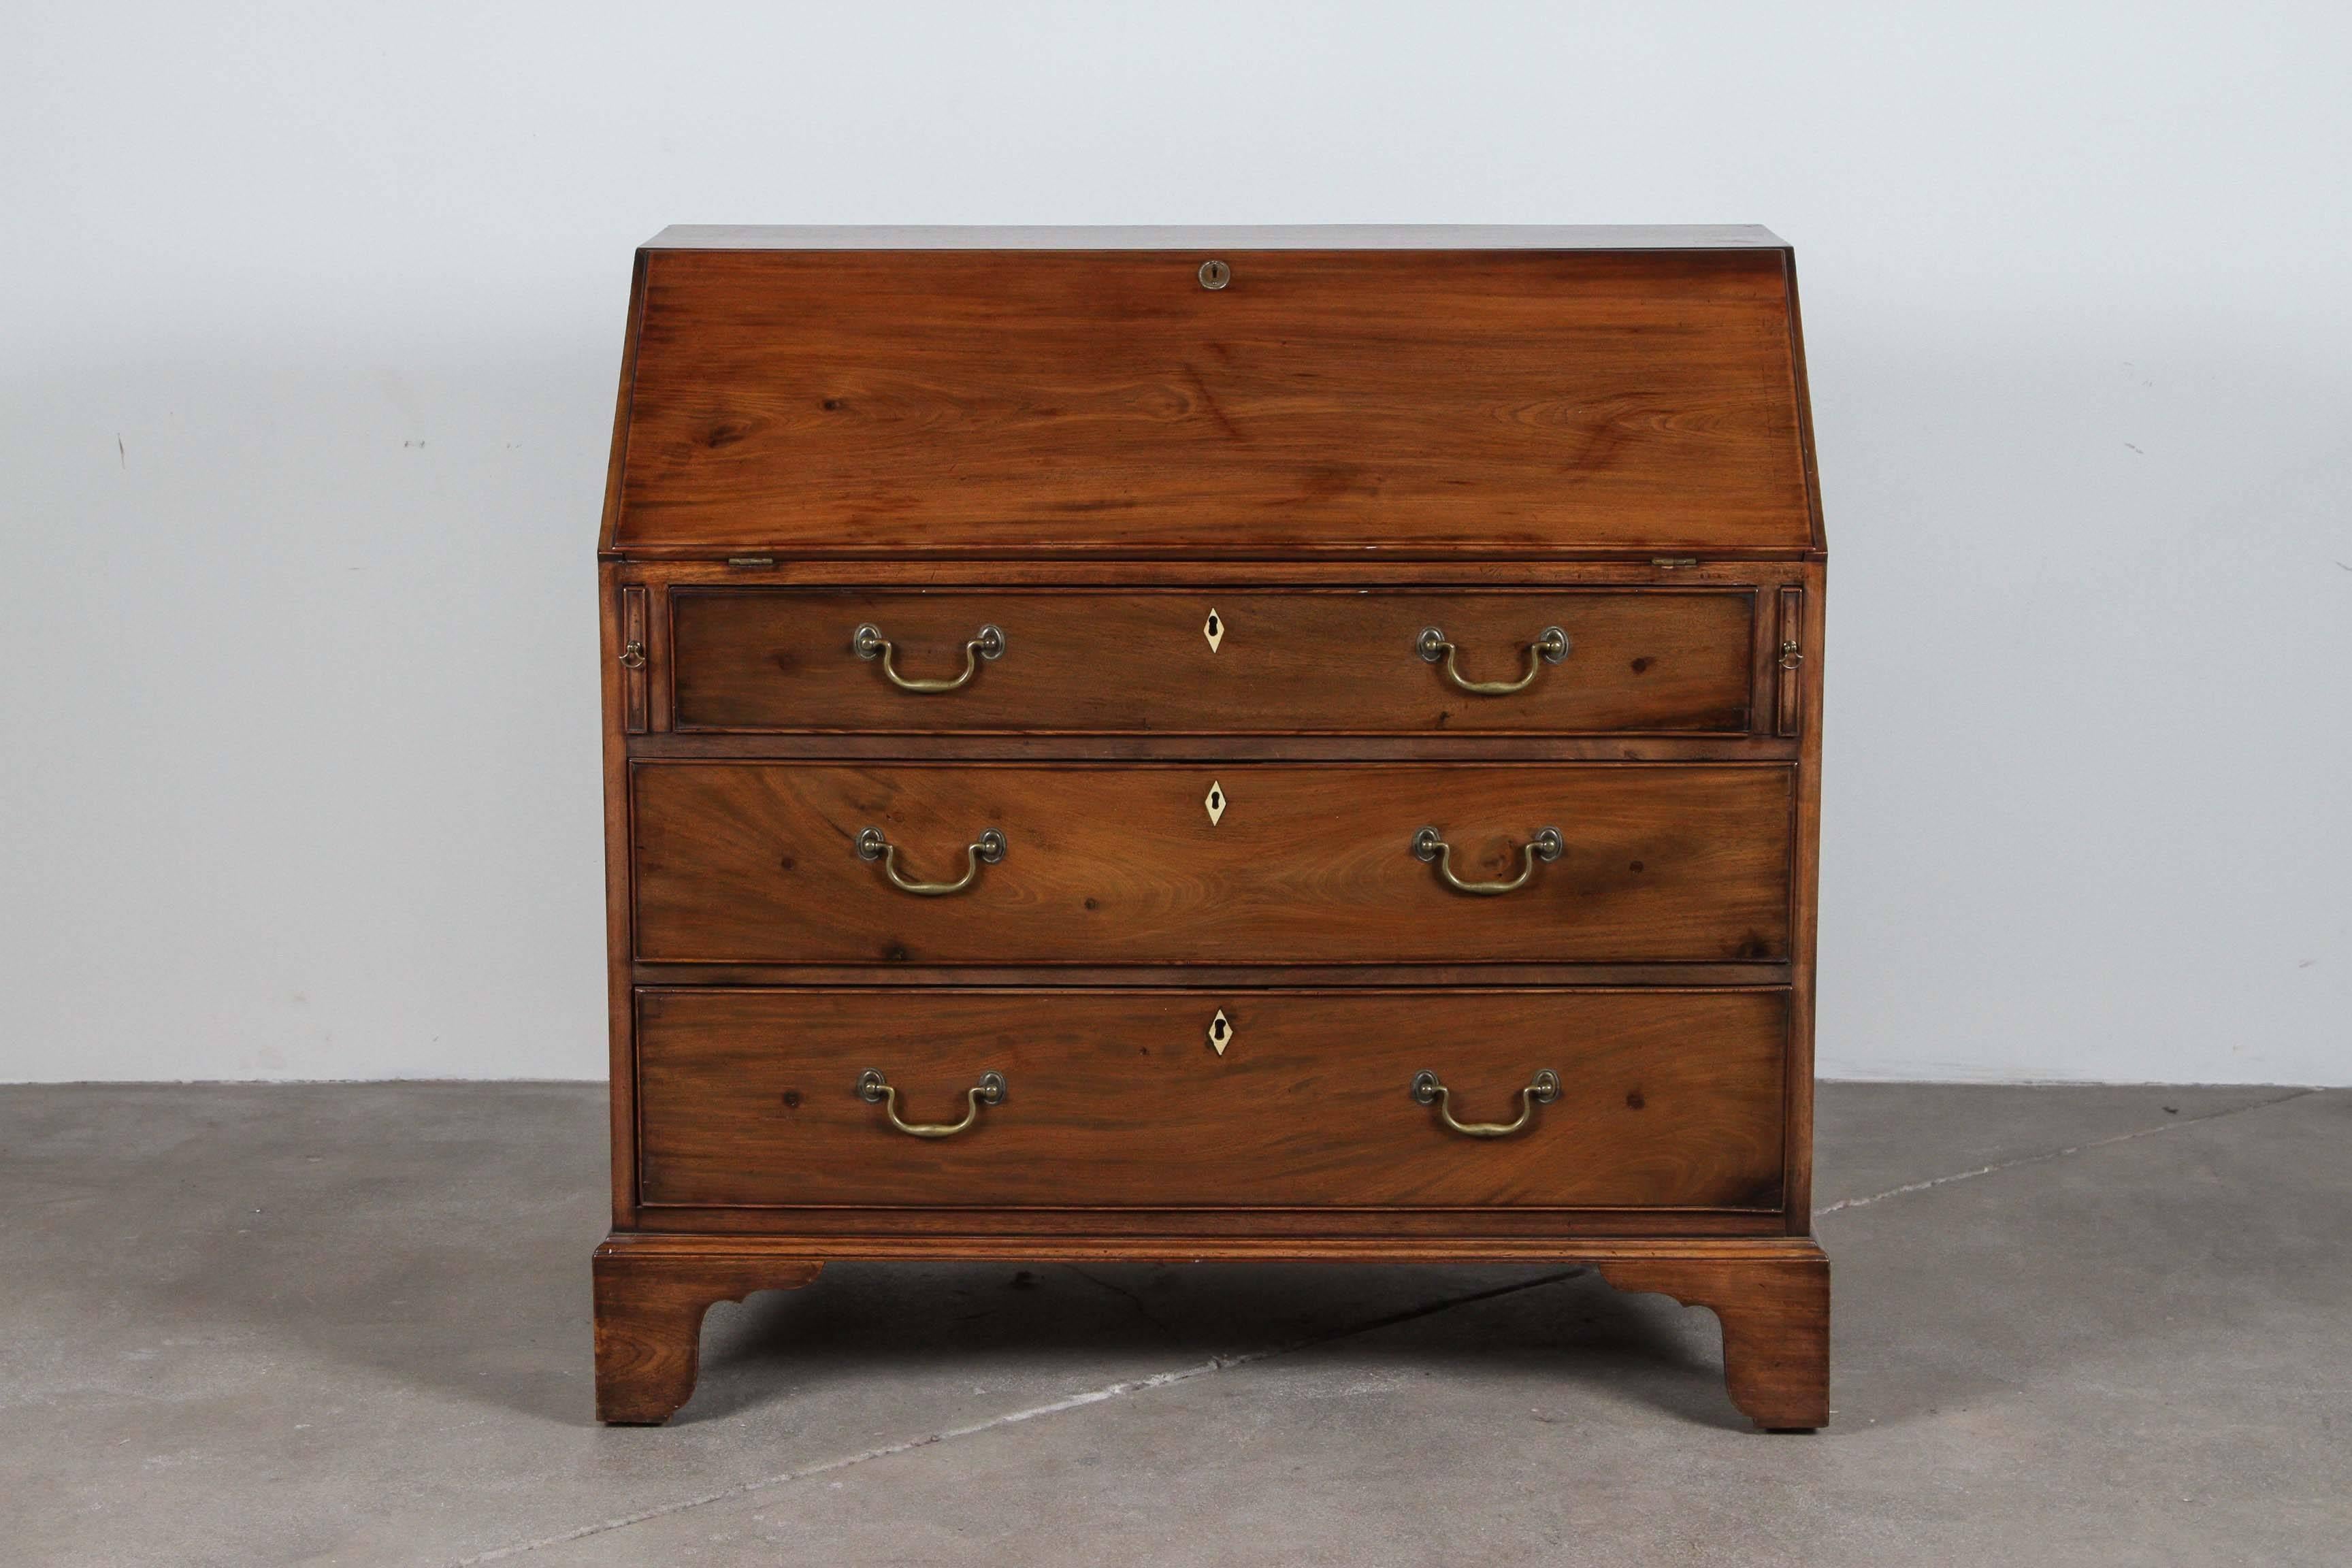 Traditional drop-leaf mahogany secretary desk with three large drawers. Brass pulls and interior moulding details.